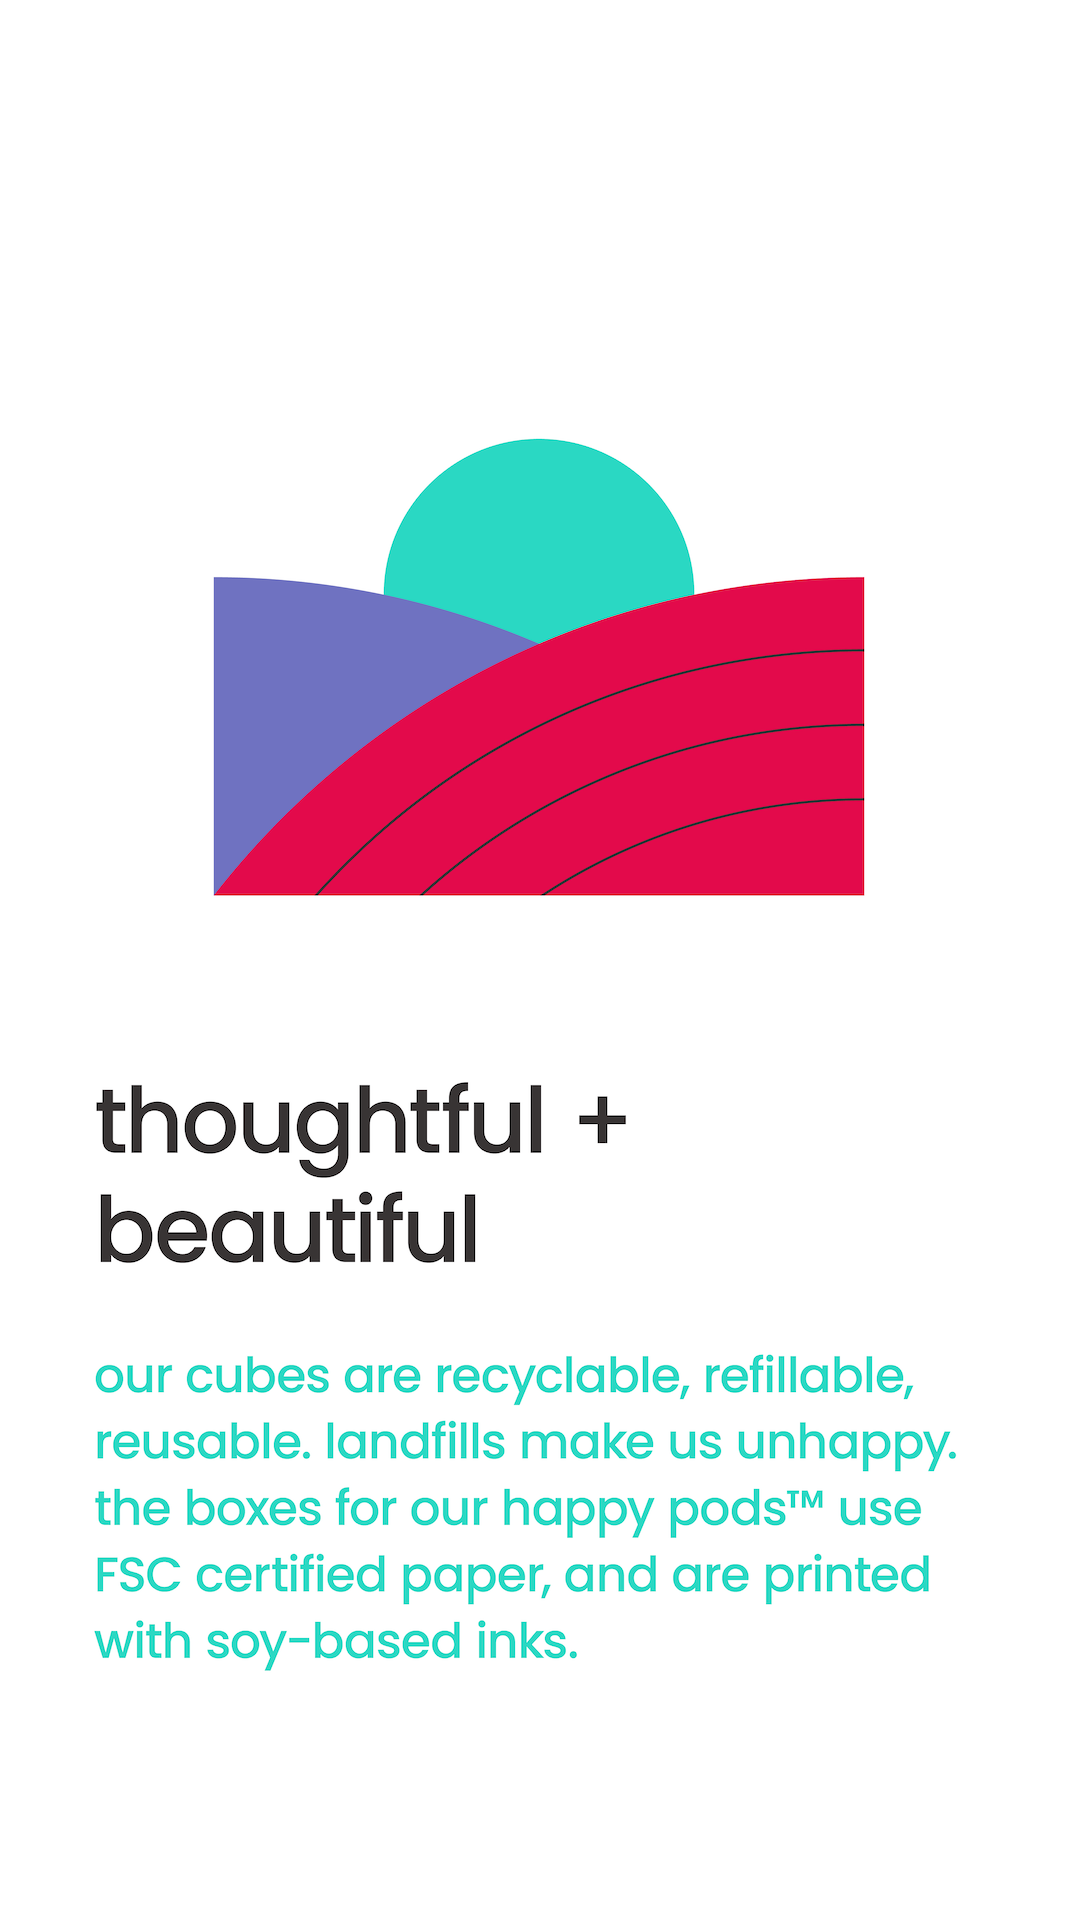 thoughtful + beautiful. our cubes are recyclable, refillable, reusable. landfills make us unhappy. the boxes for our happy pods™ use FSC certified paper, and are printed with soy-based inks. 